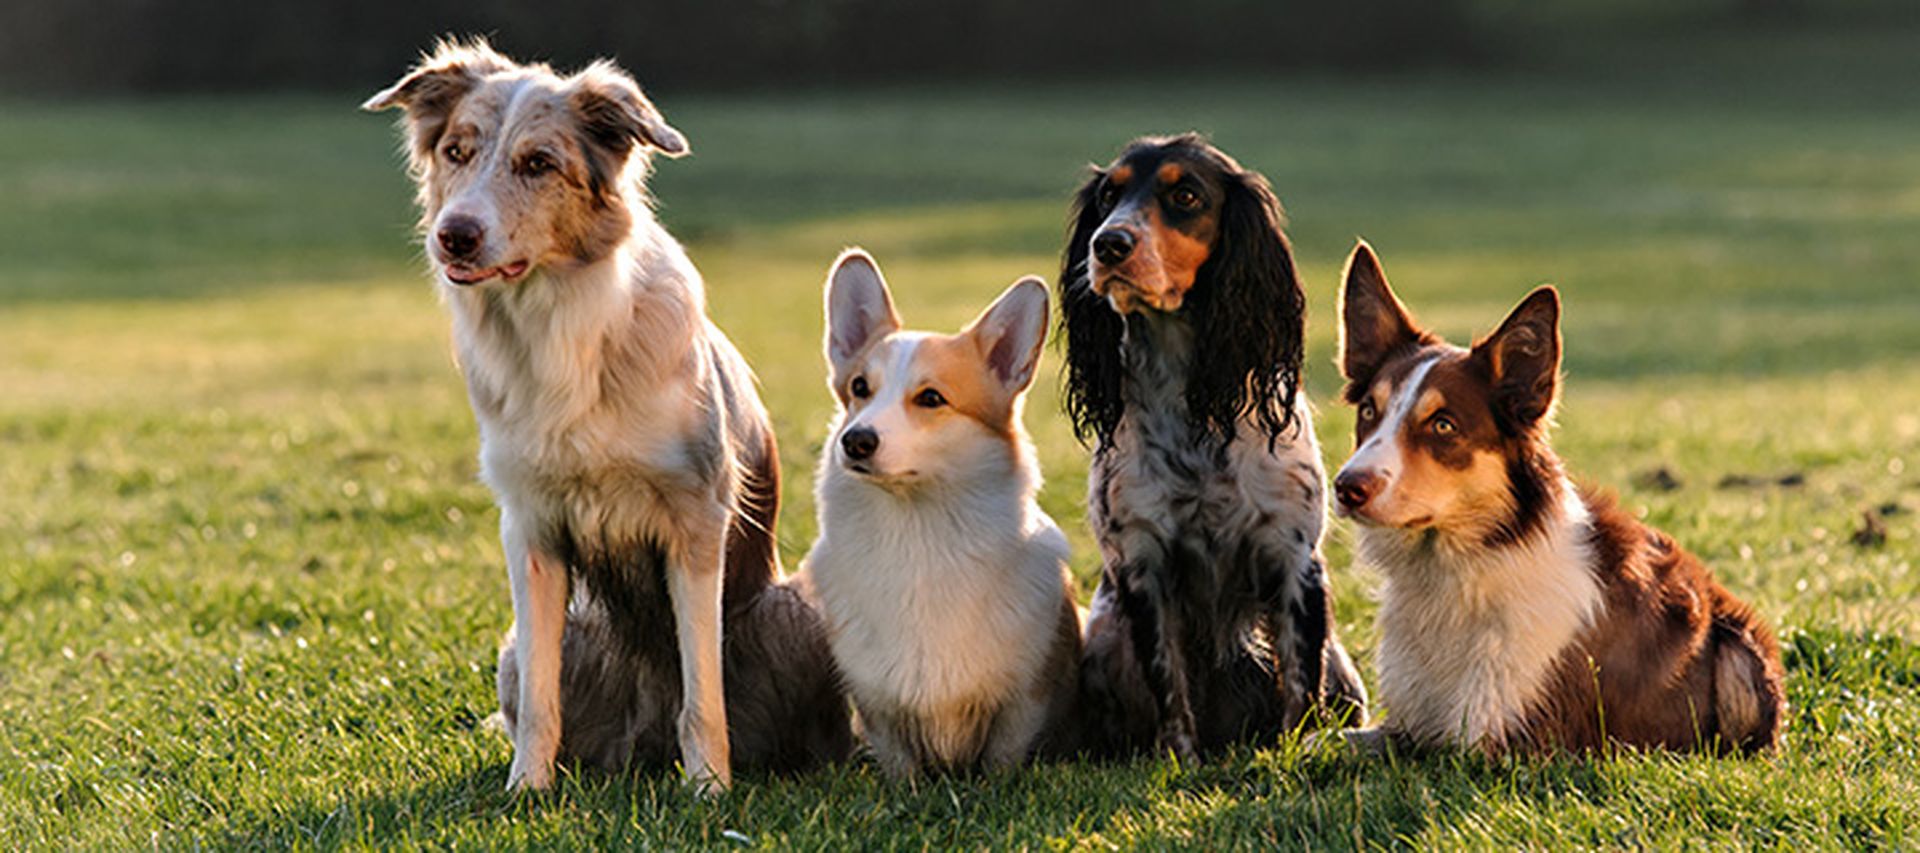 Four dogs of different breeds sitting still on a field of grass.